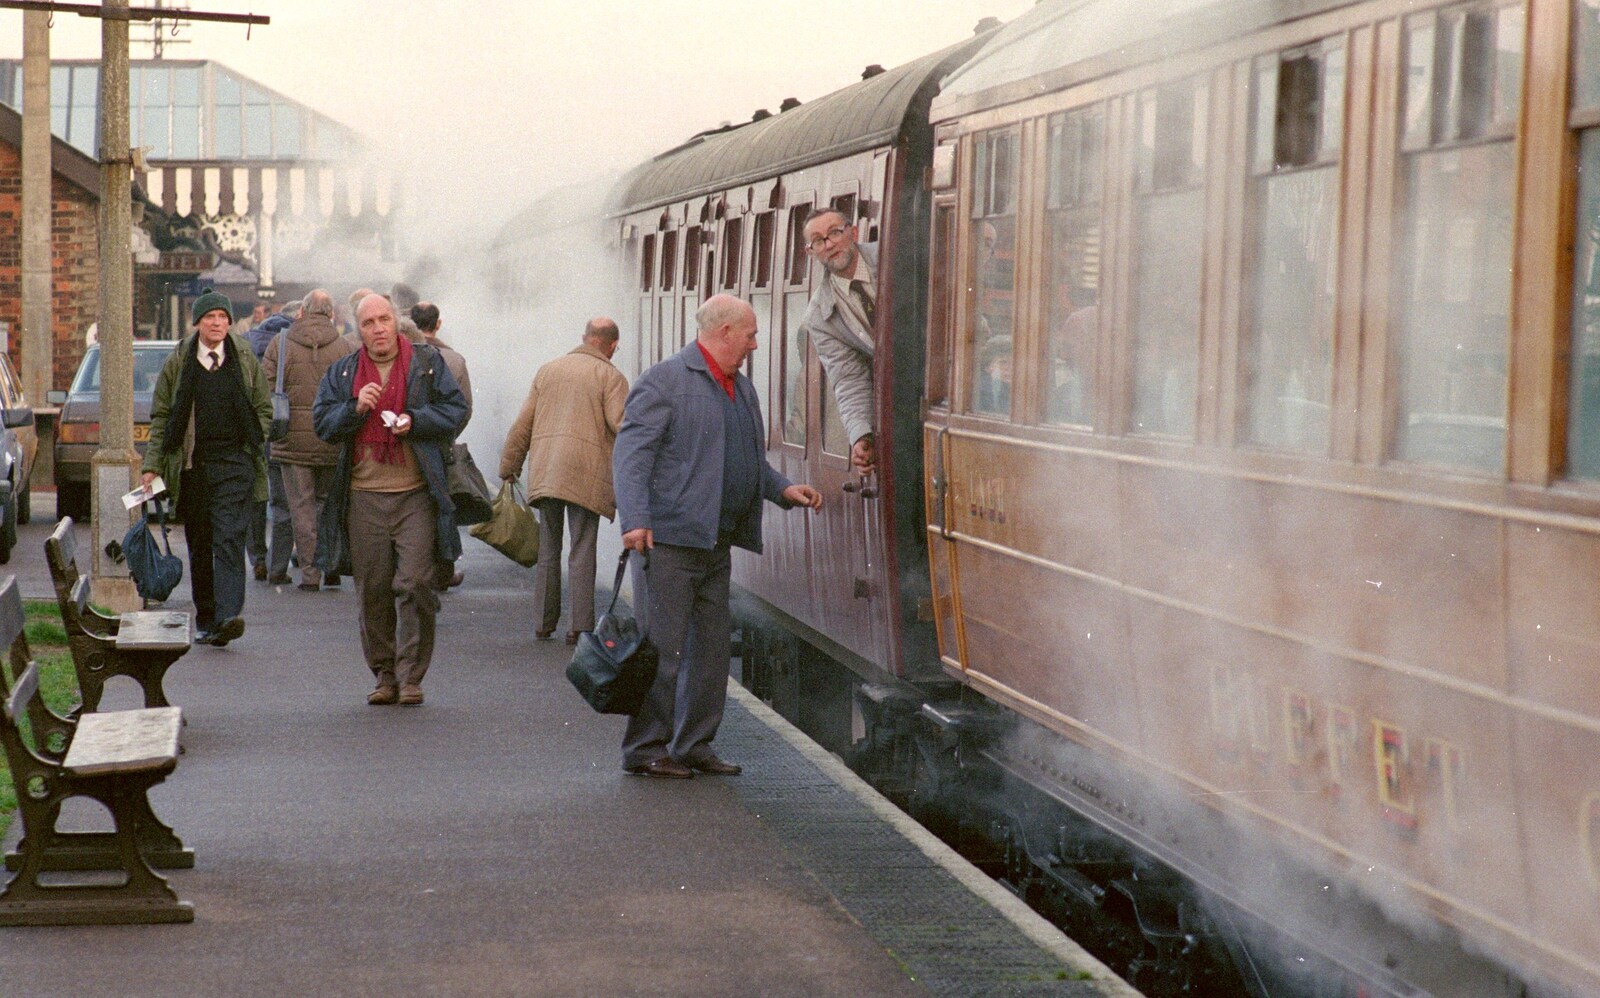 A Visit to Sheringham, North Norfolk - 20th November 1987: Steamy carriages at Sheringham